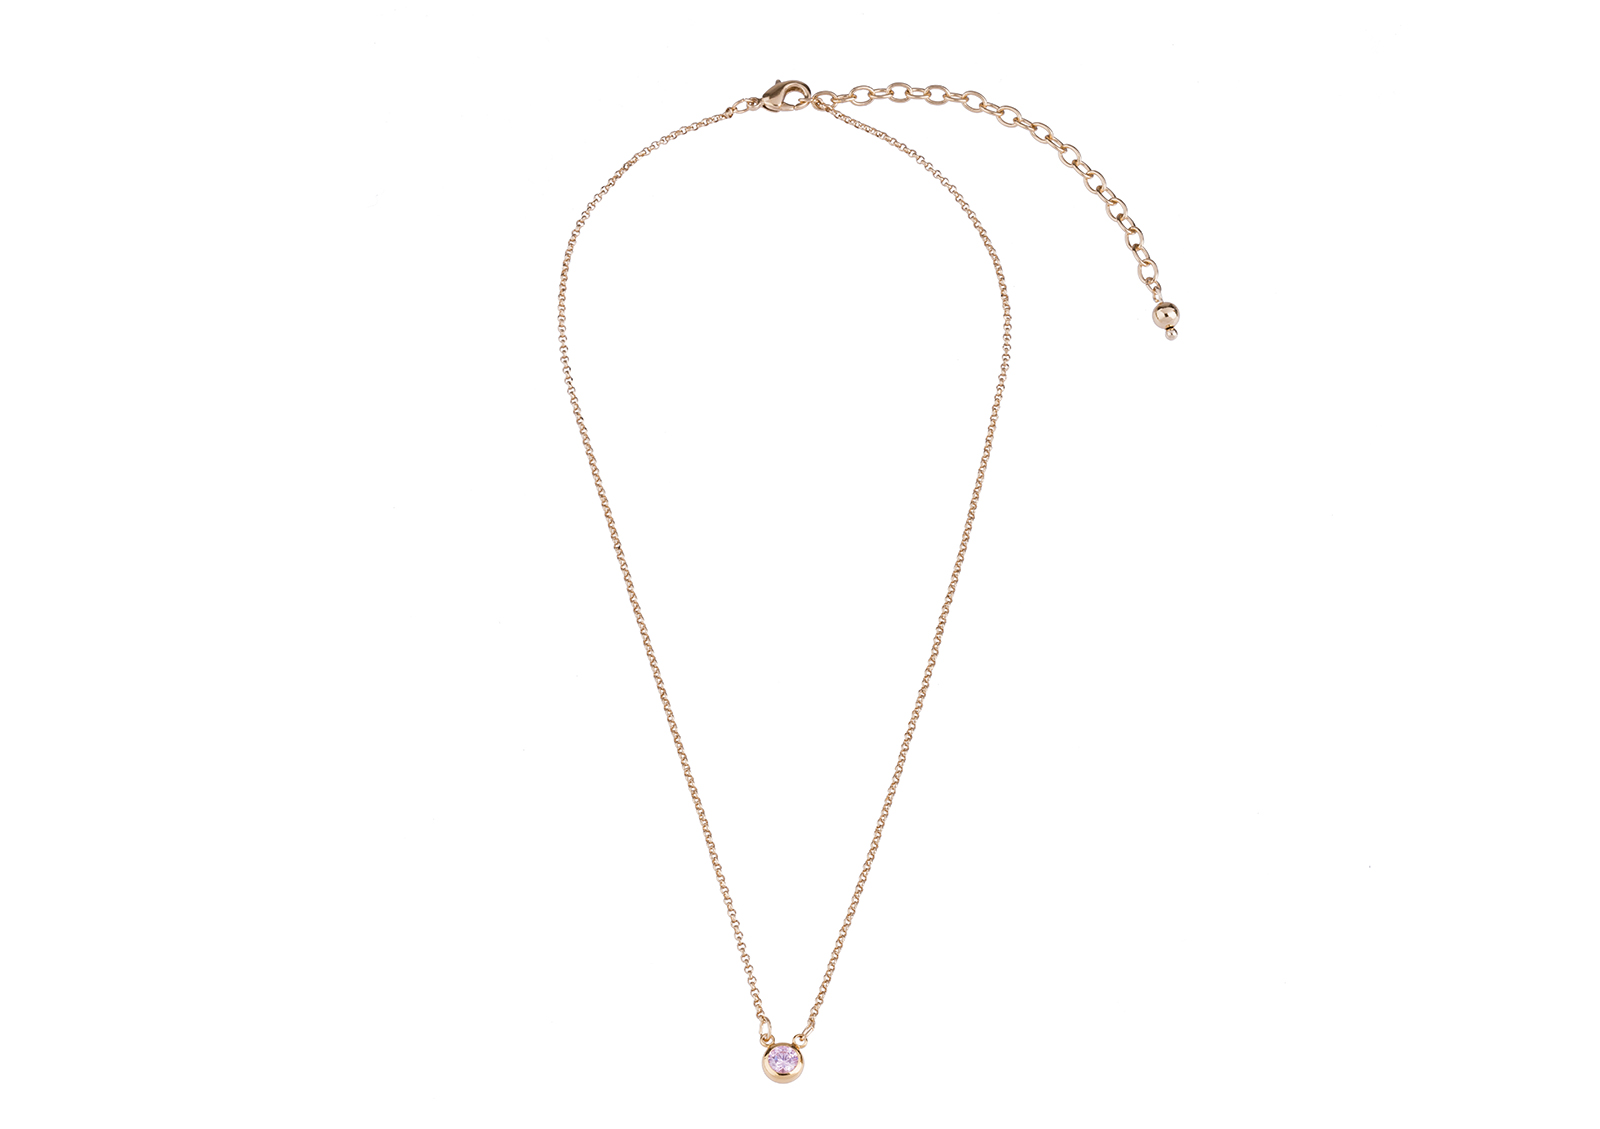 Necklace: 217702